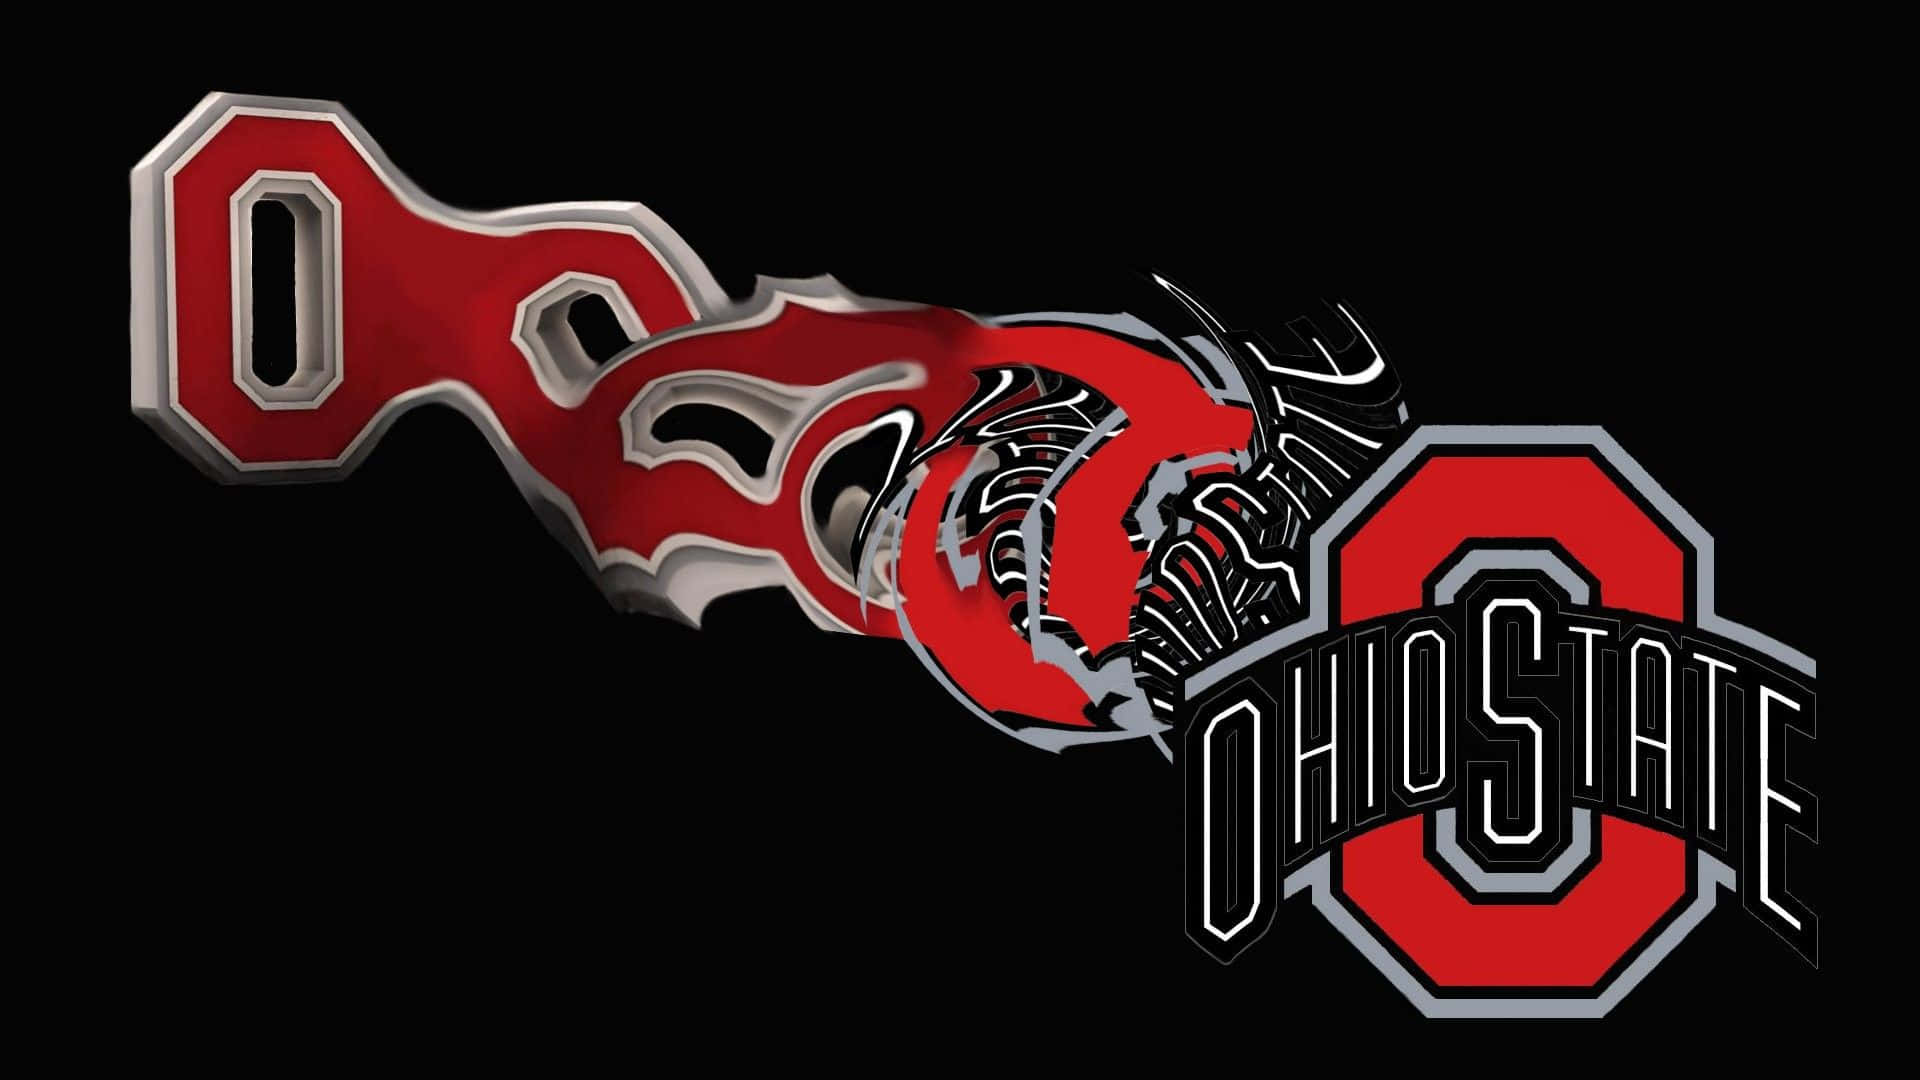 Deformed And Stretched Ohio State Logo Wallpaper